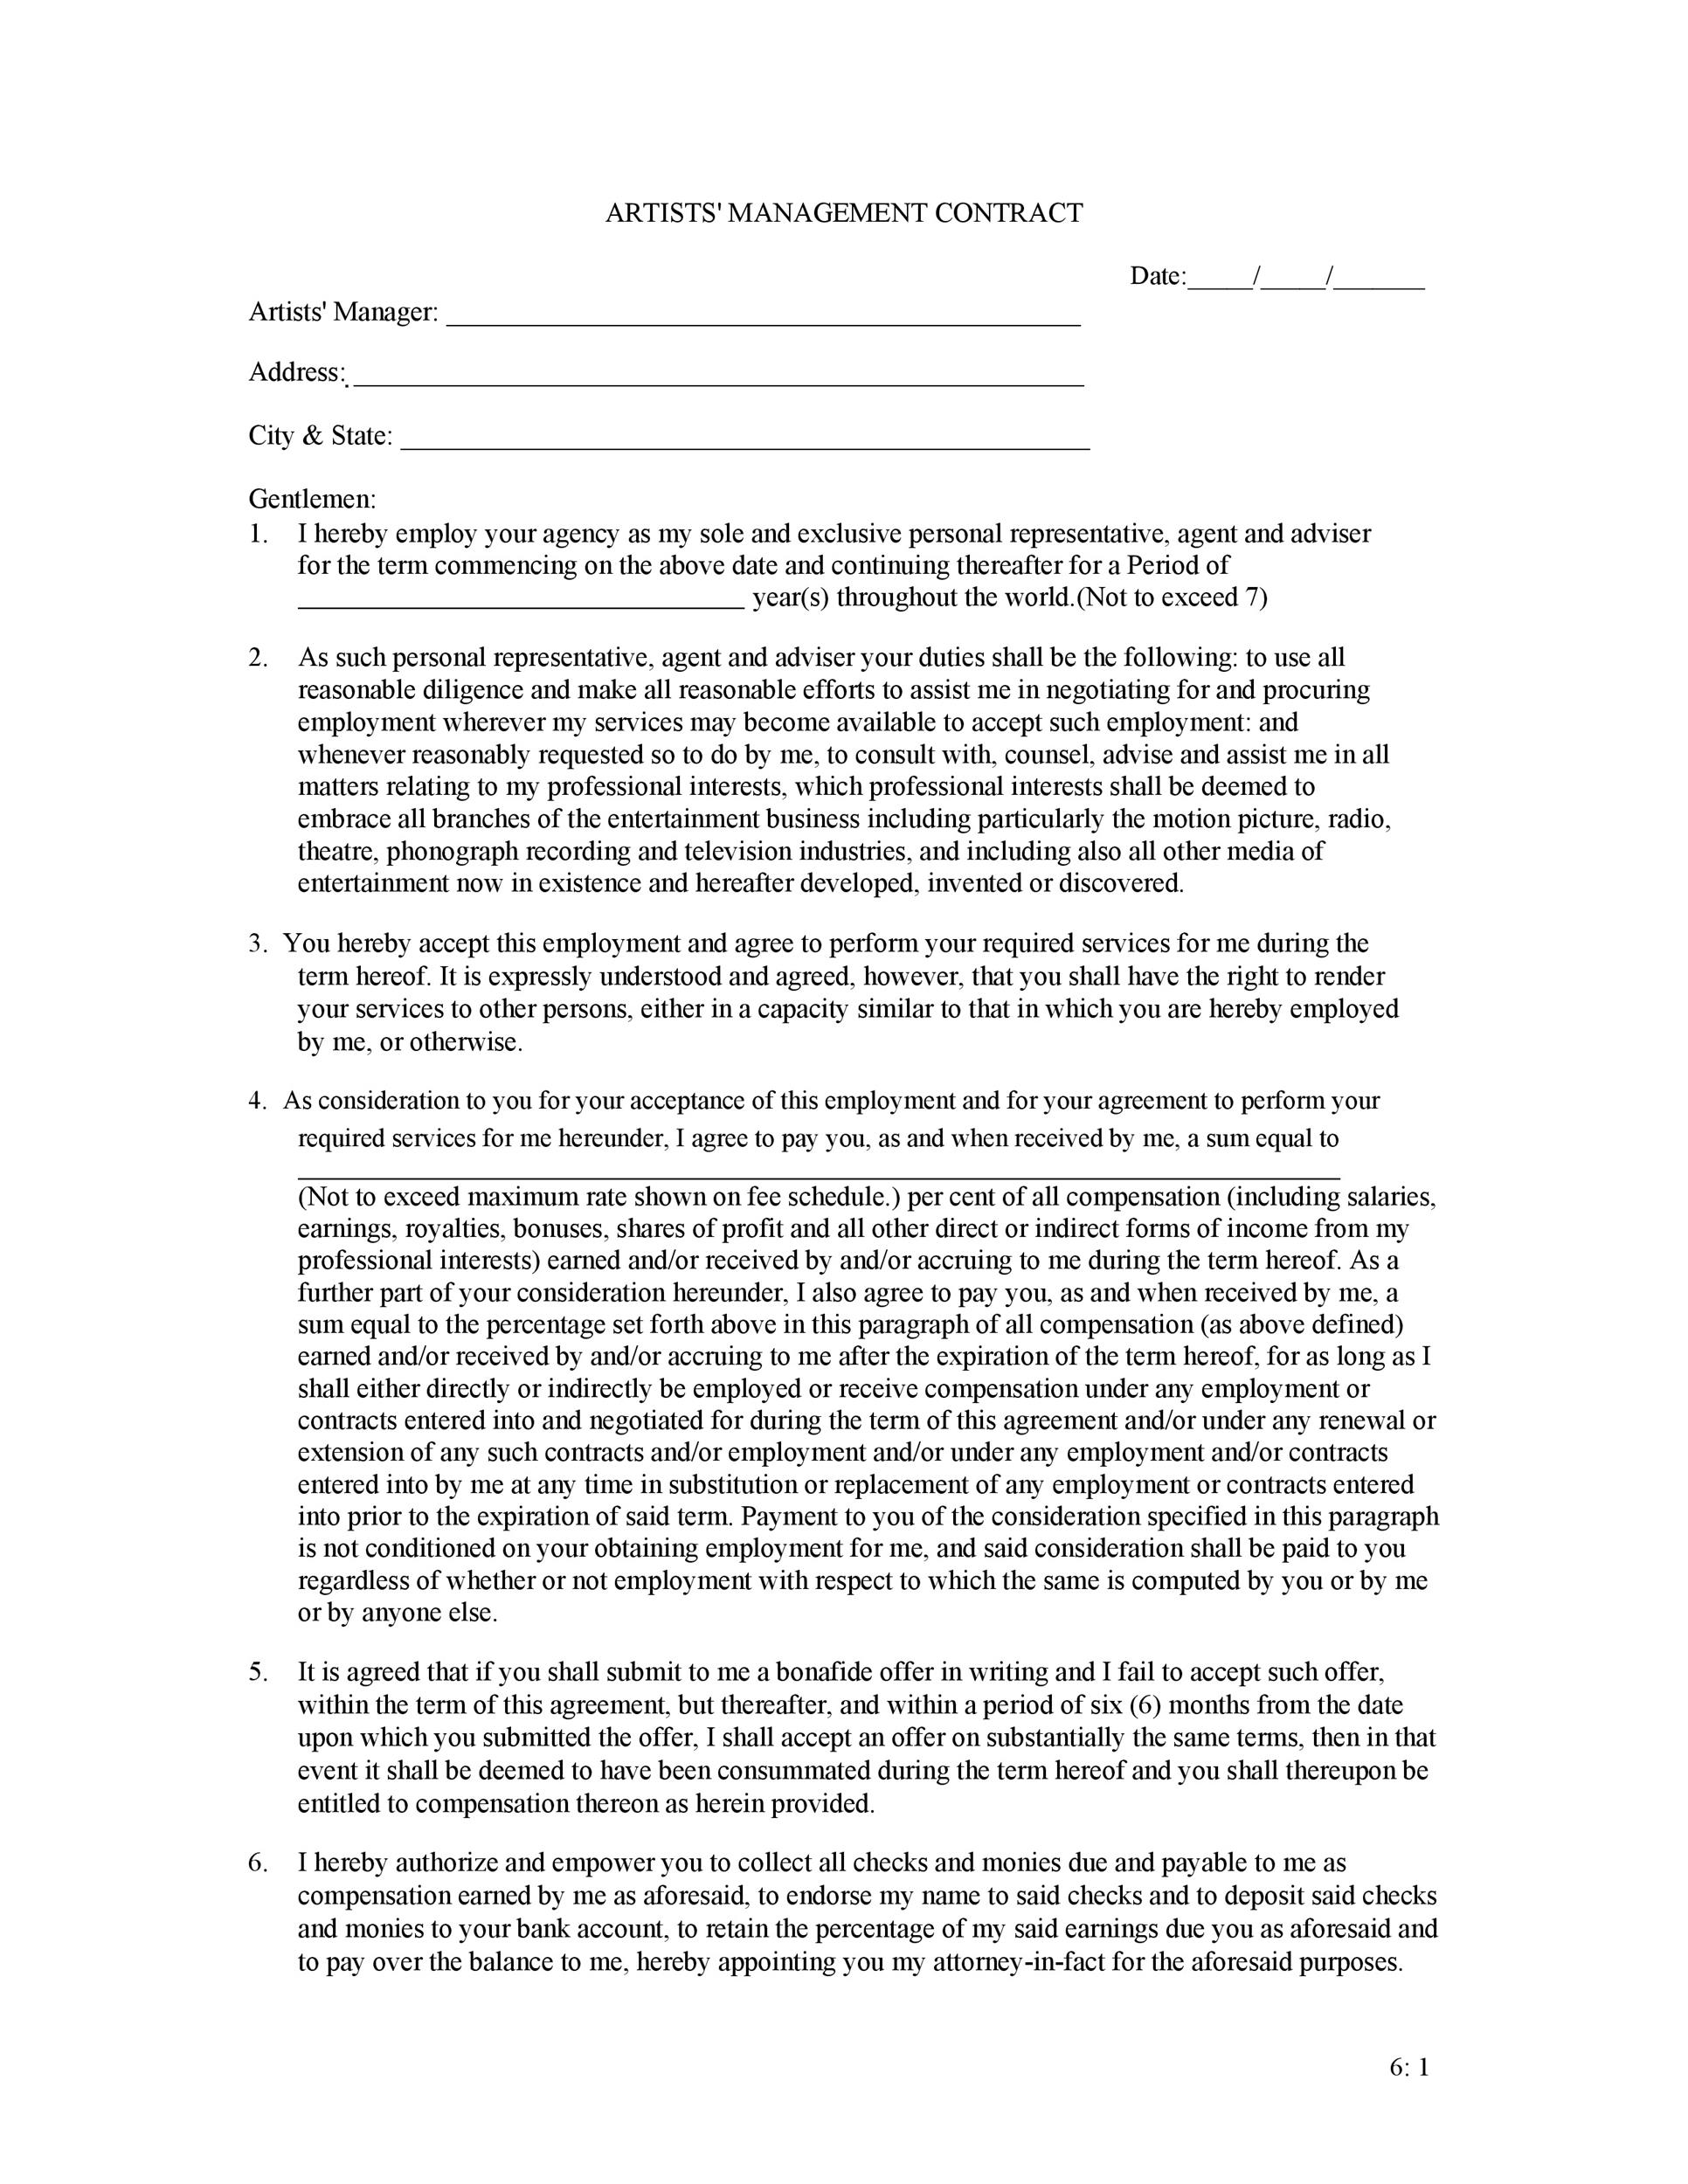 Free artist management contract 20